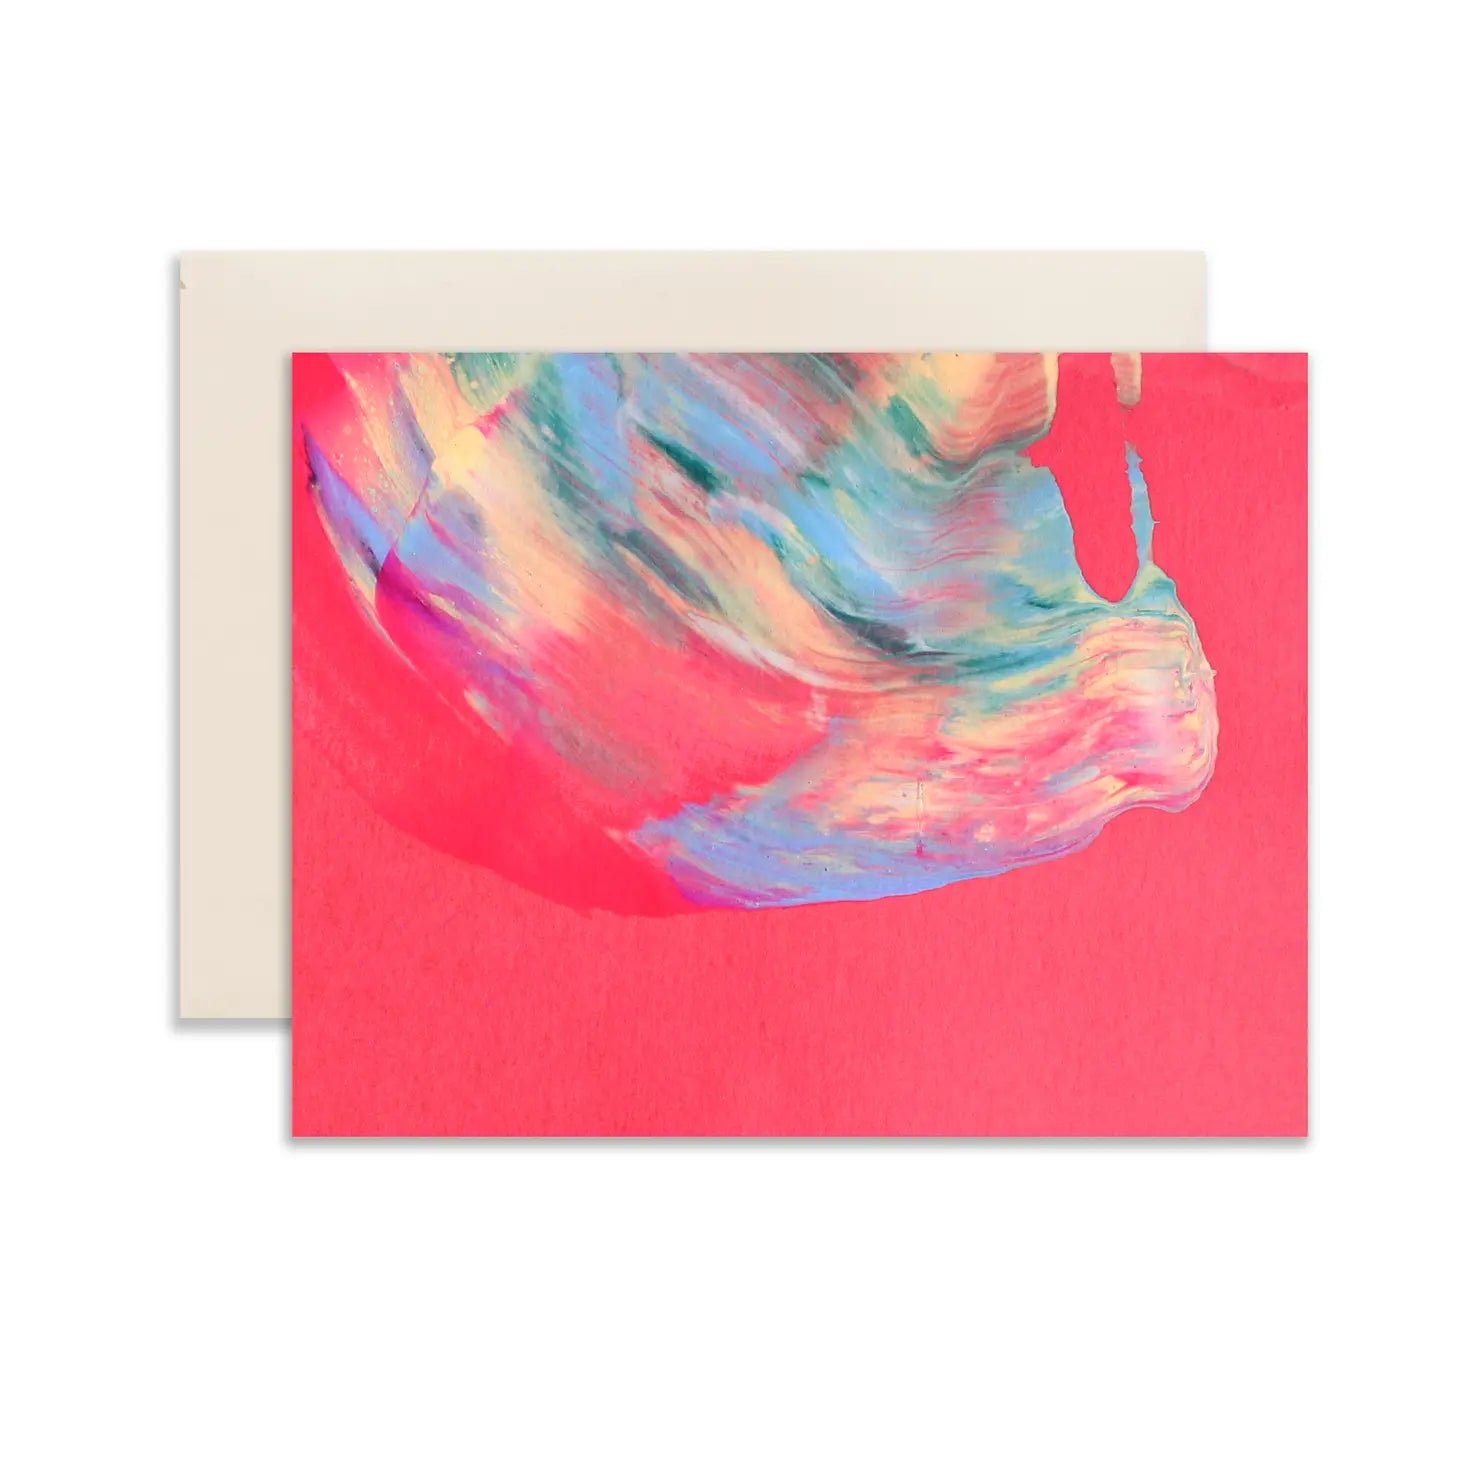 Red pink card with blue, pink, yellow paint smear pattern 